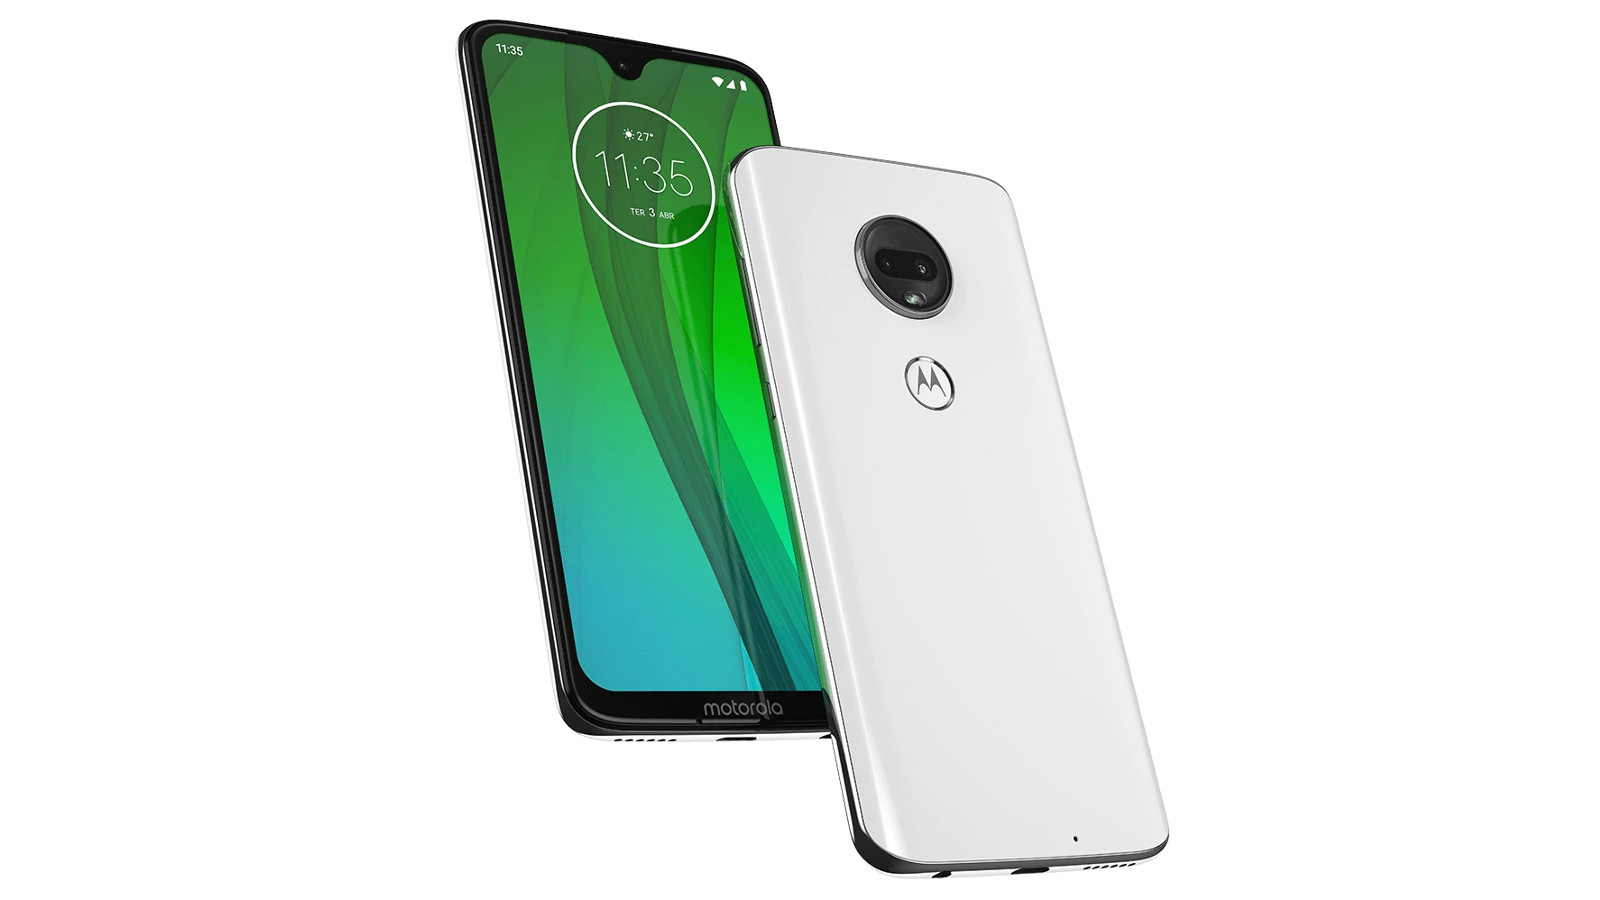 A leaked render apparently showing the Moto G7.